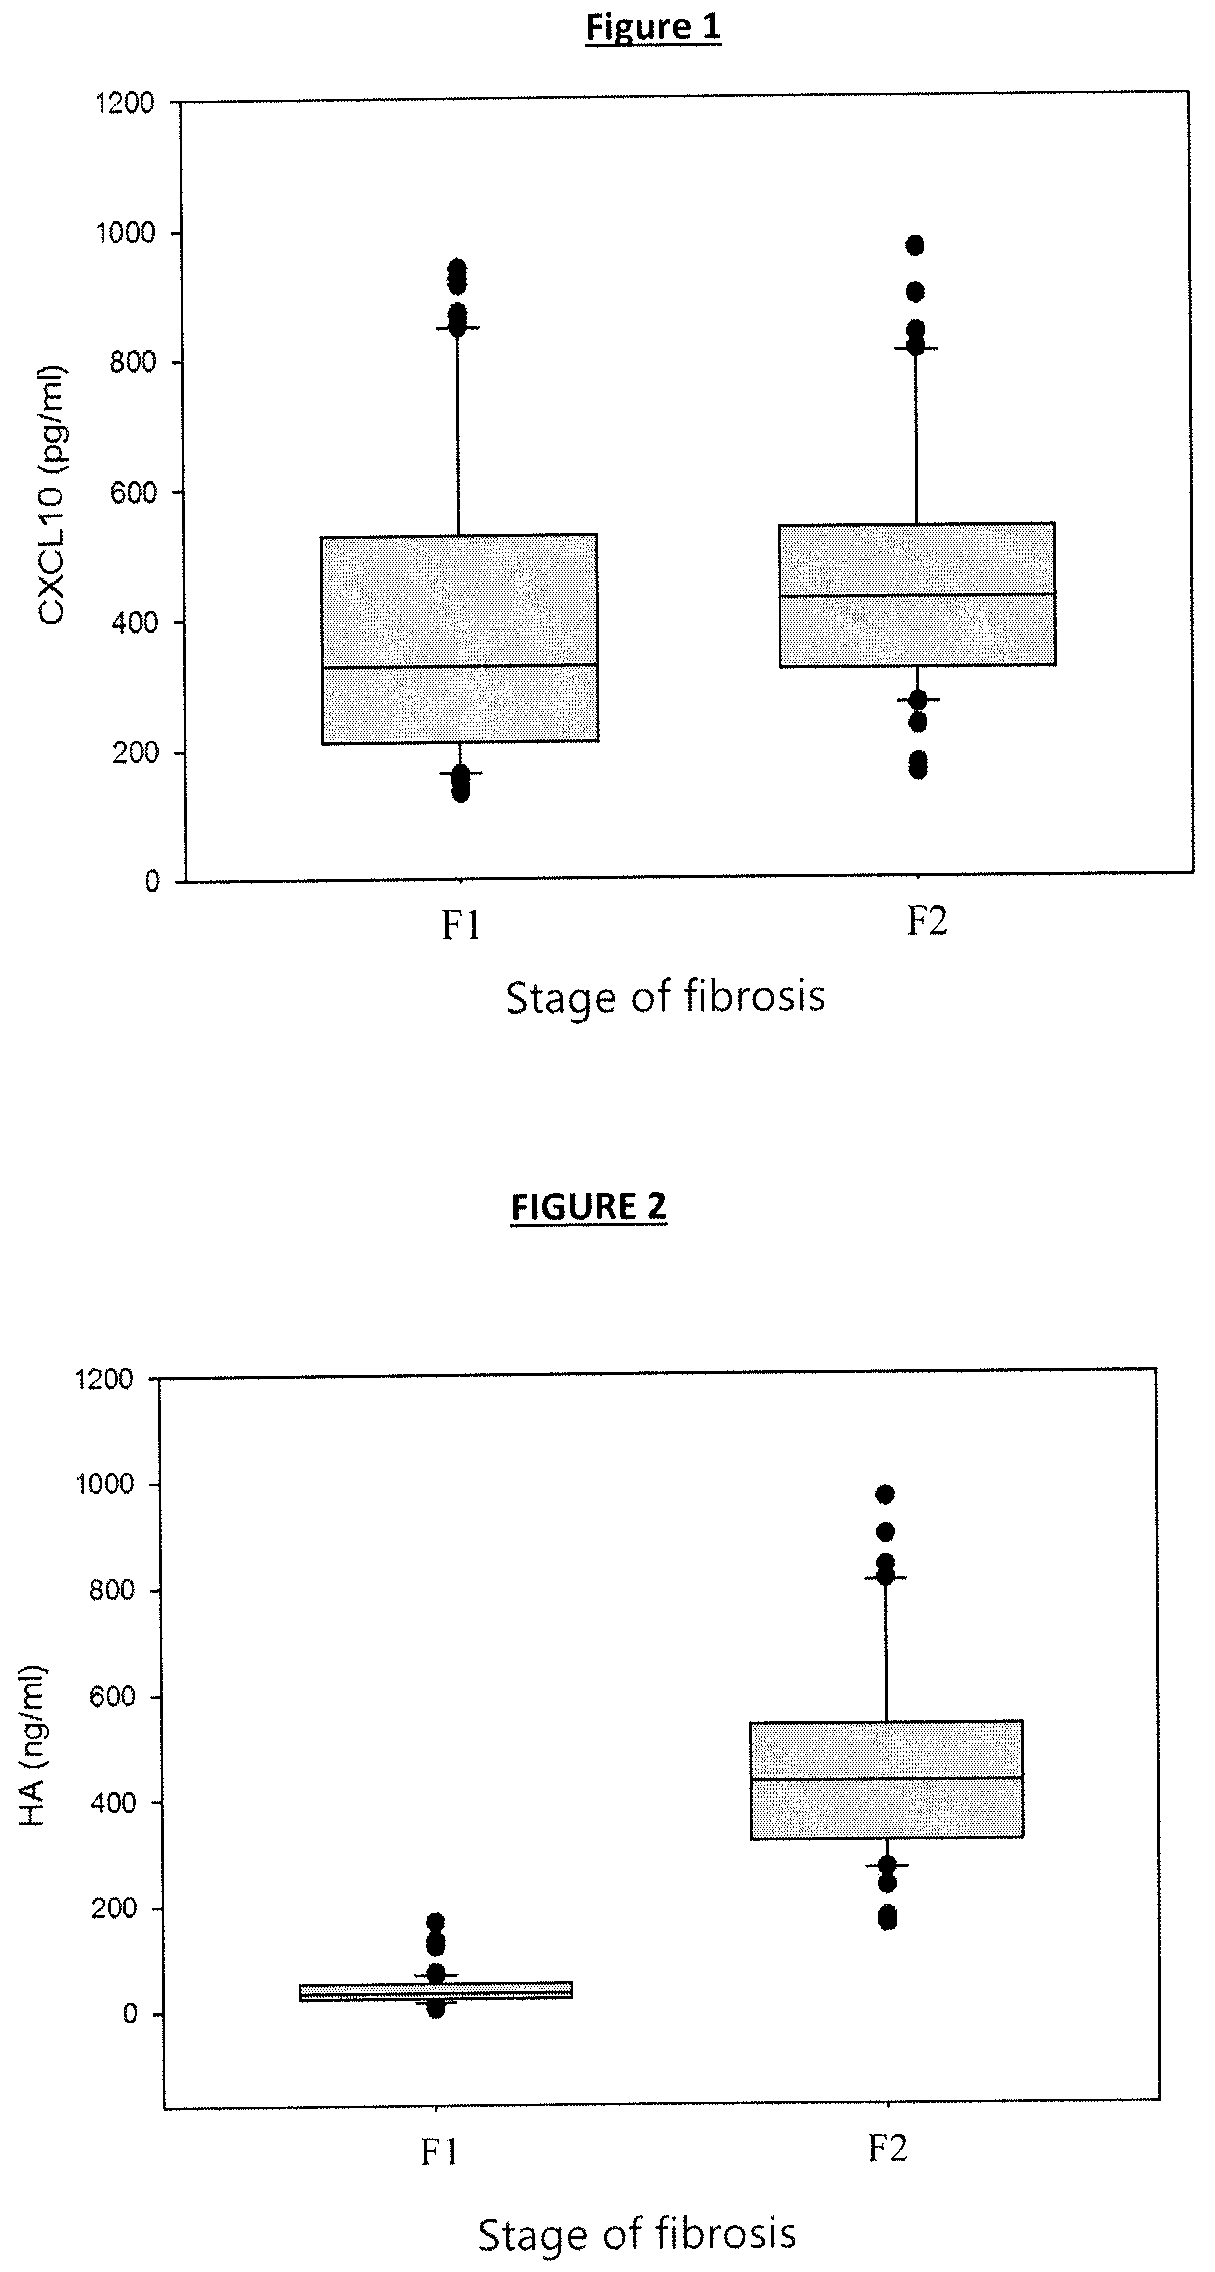 Synergistic combination of biomarkers for detecting and assessing hepatic fibrosis